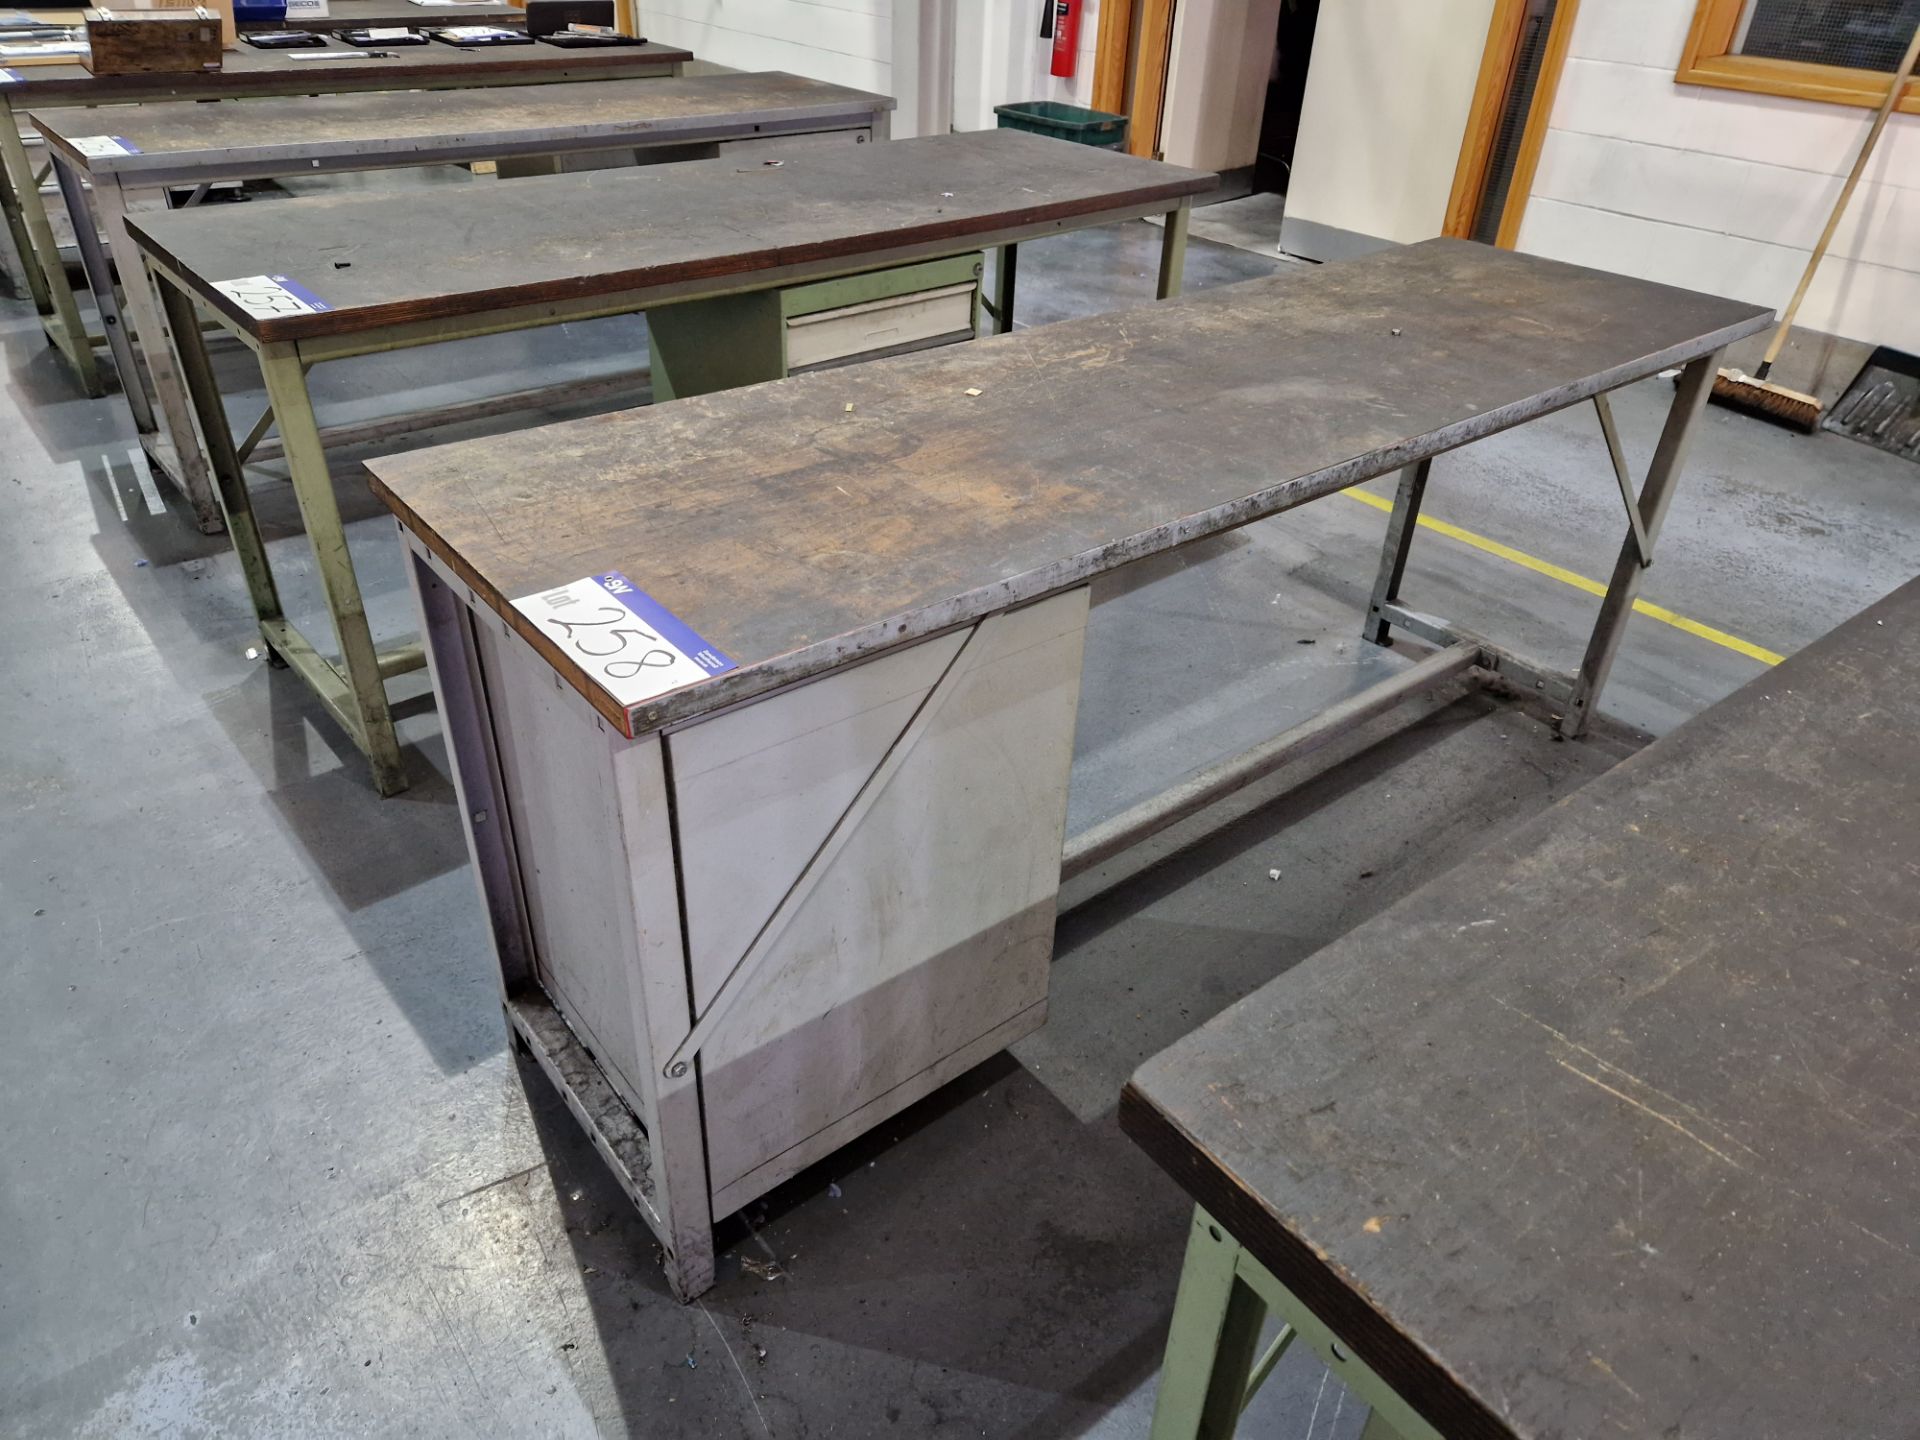 Metal Framed Wooden Top Pedestal Workbenches, Approx. 2m x 0.6m x 0.85mPlease read the following